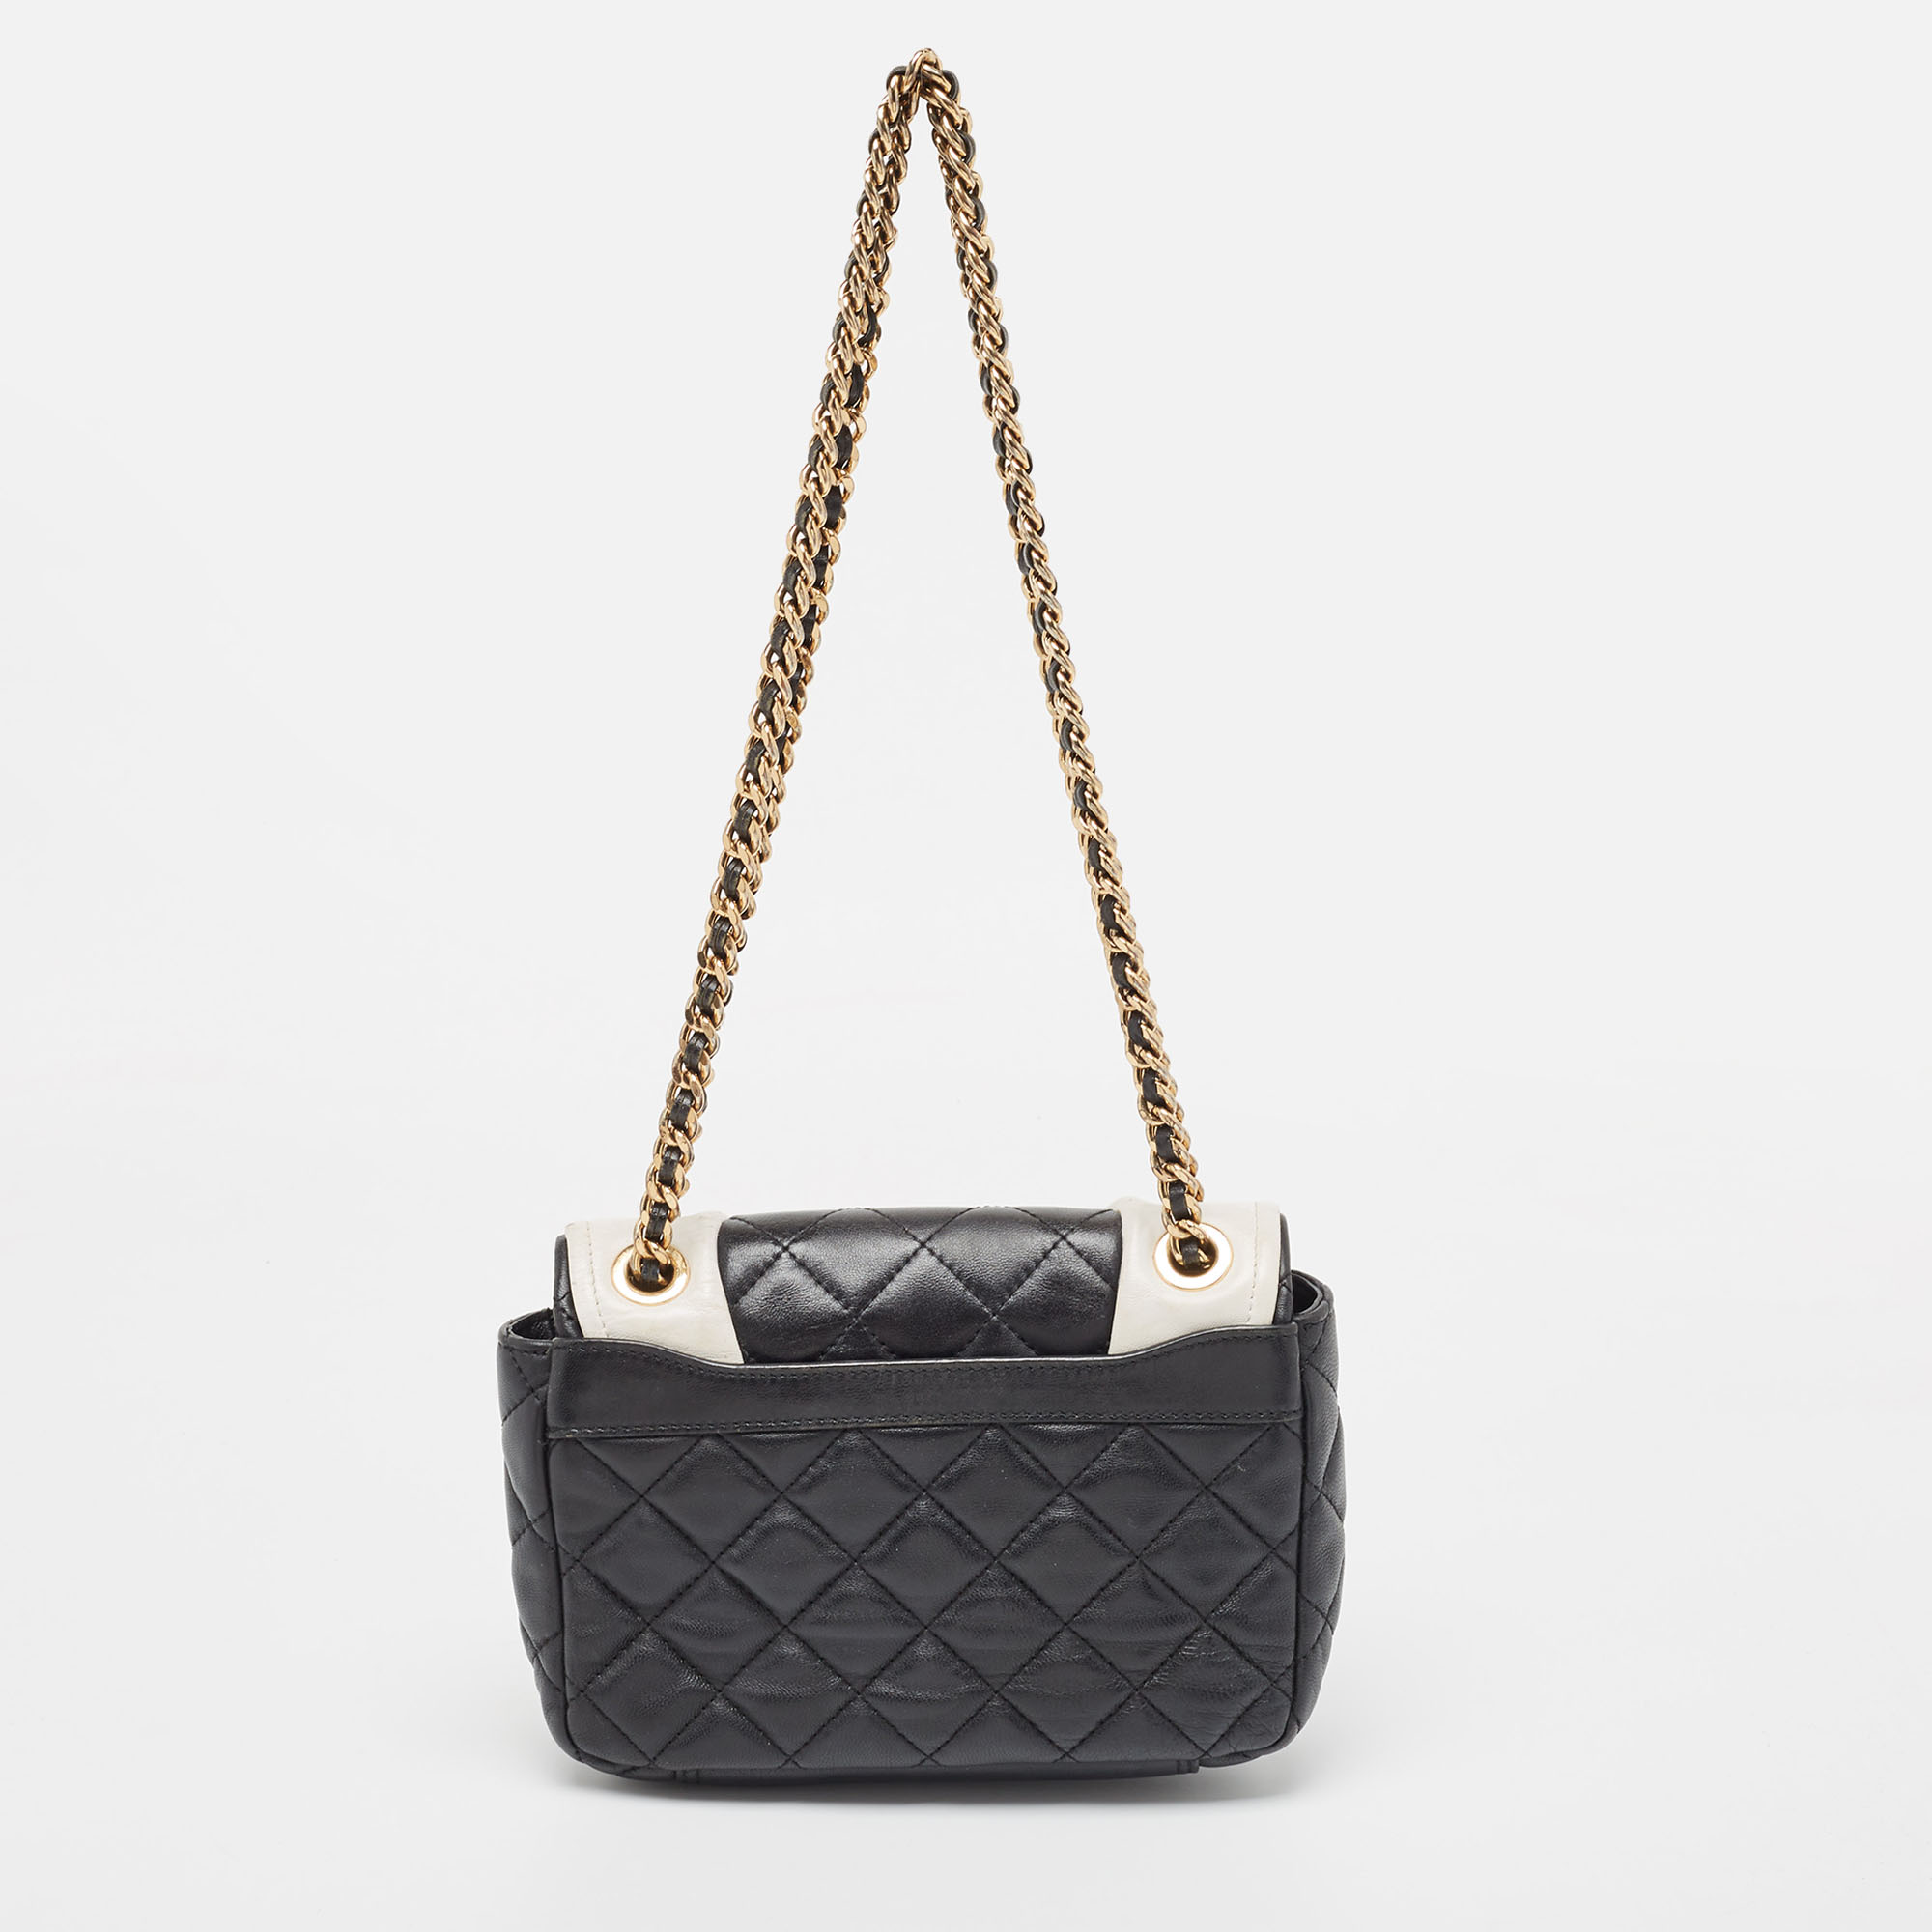 Moschino Black/White Quilted Leather Jacket Shoulder Bag